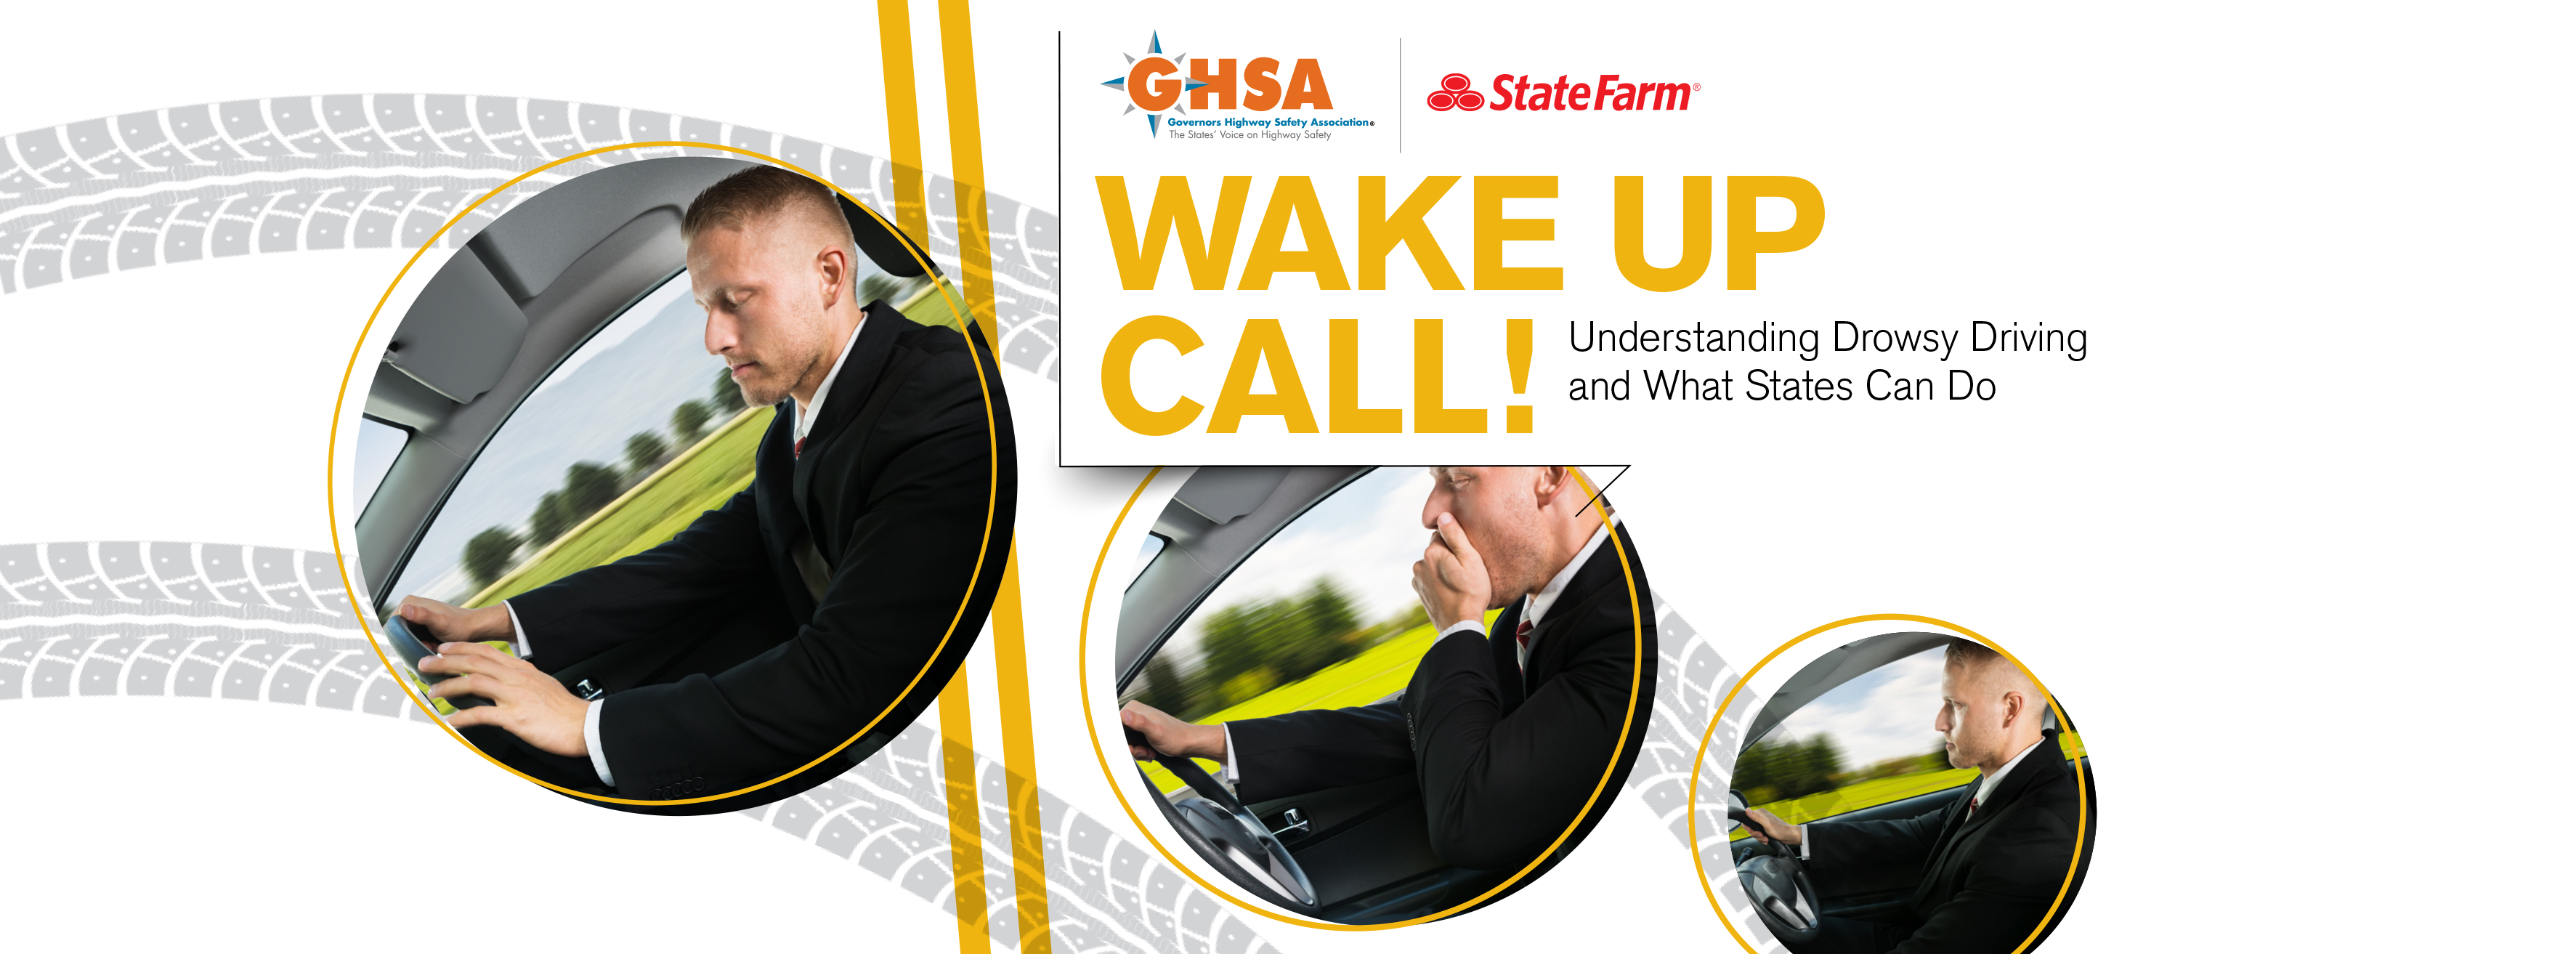 Wake Up Call! Understanding Drowsy Driving and What States Can Do